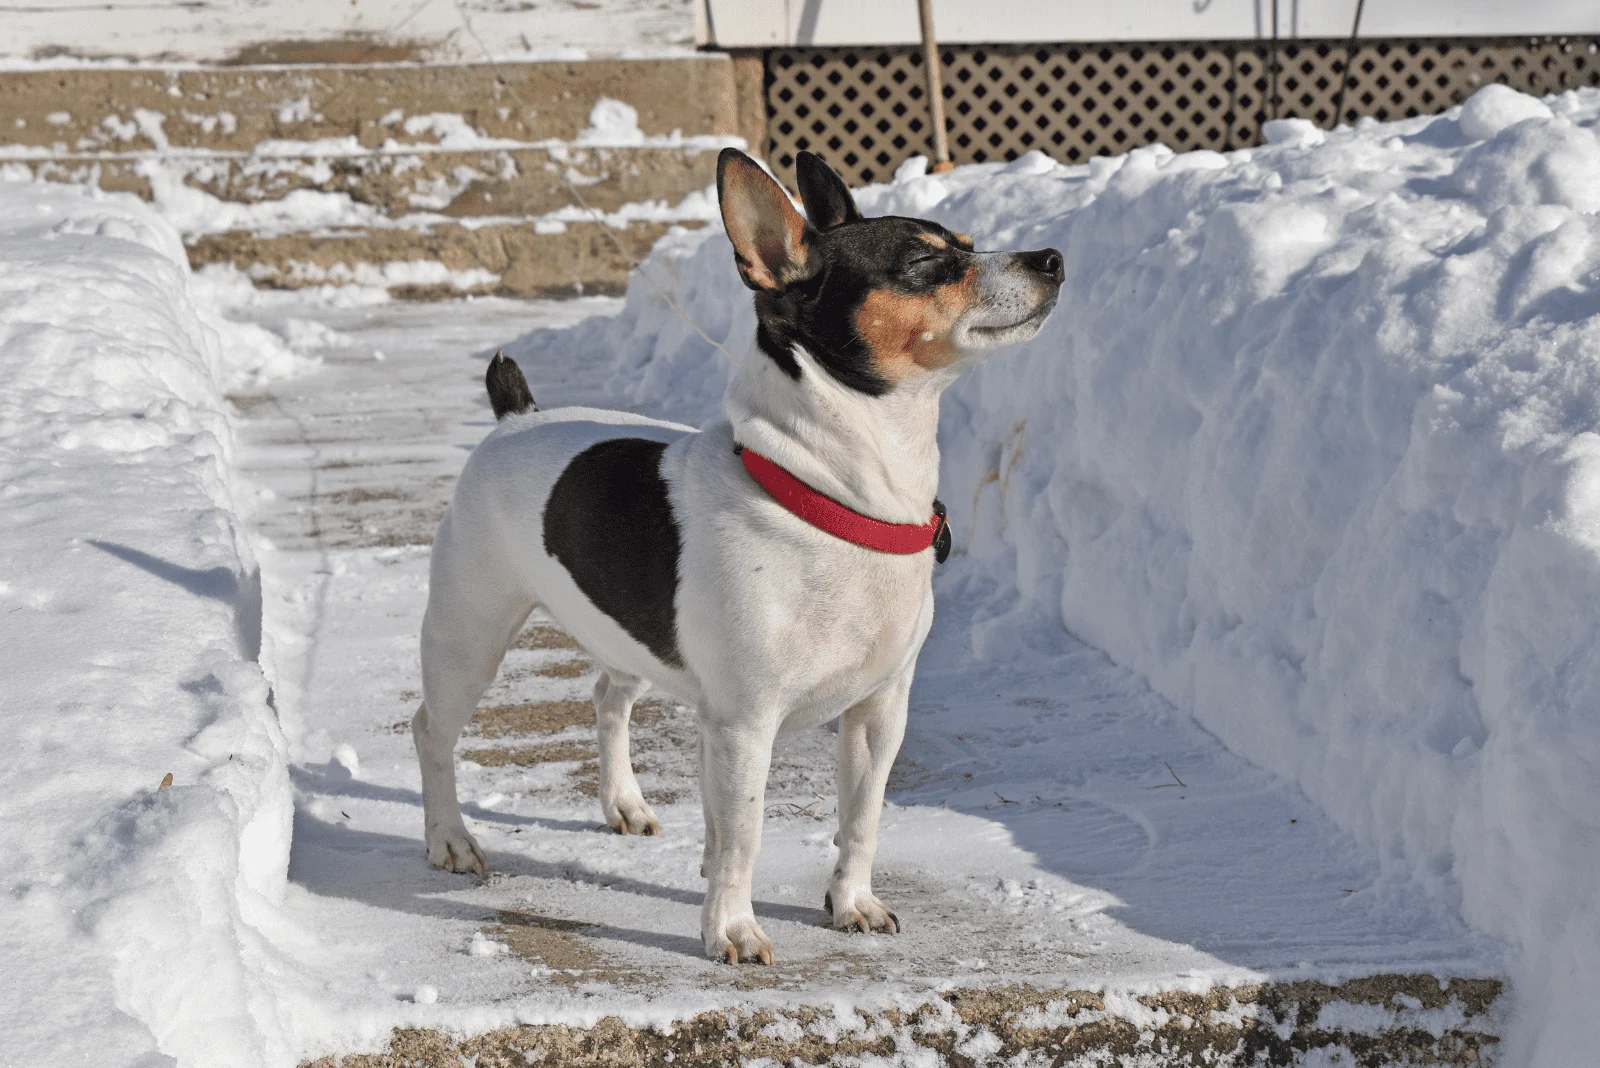 Rat Terrier is standing in the snow and enjoying the sun